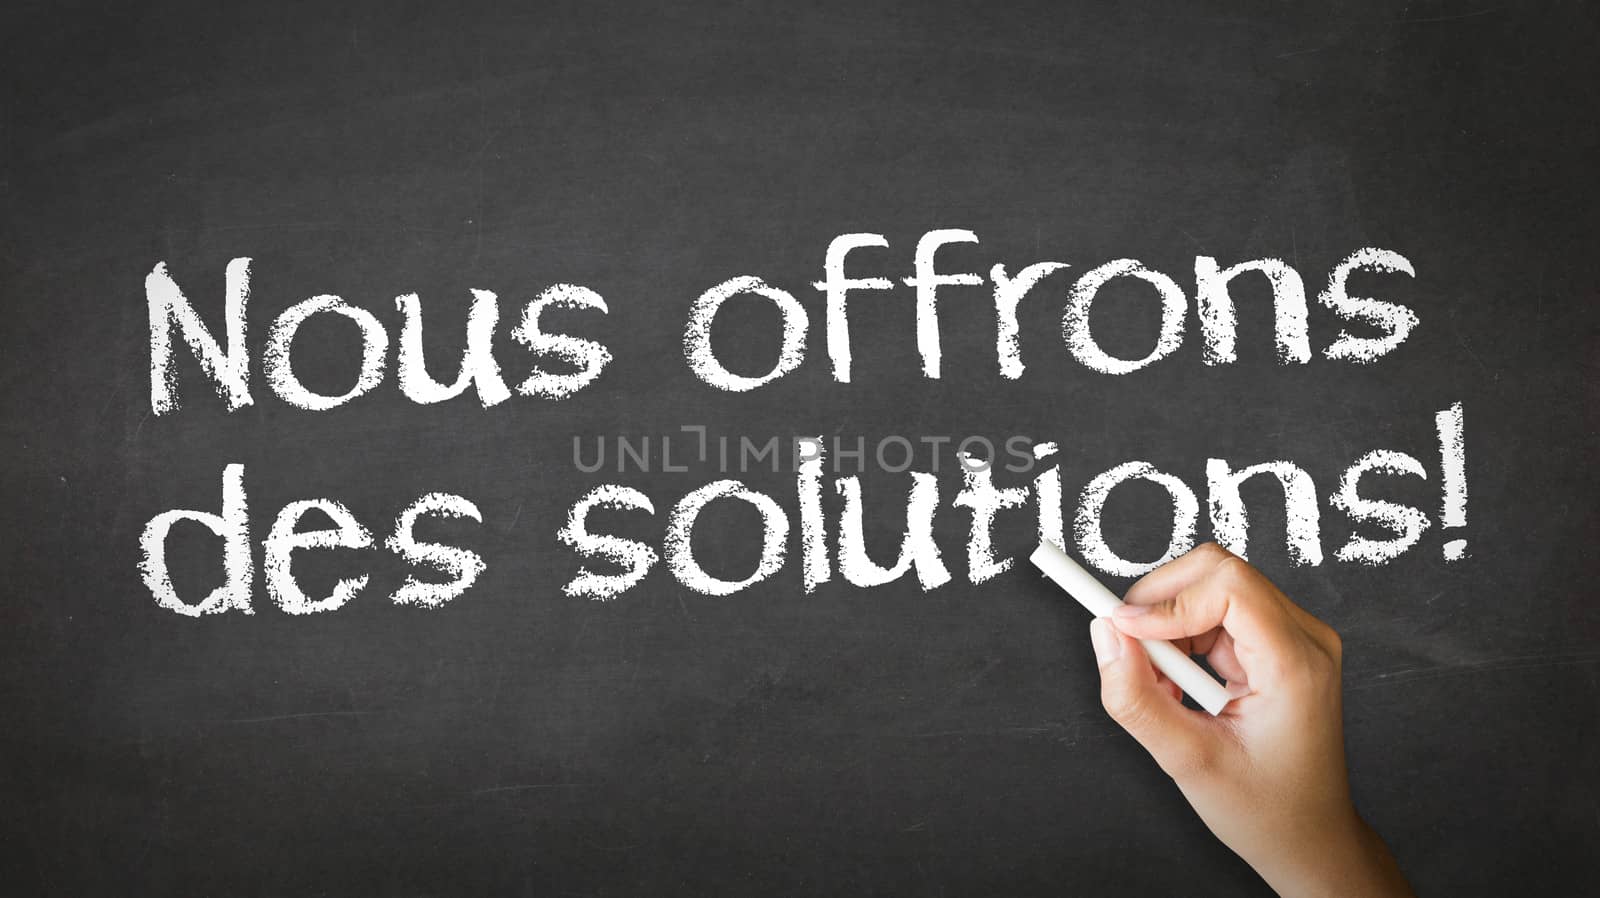 We offer Solutions (In French) by kbuntu